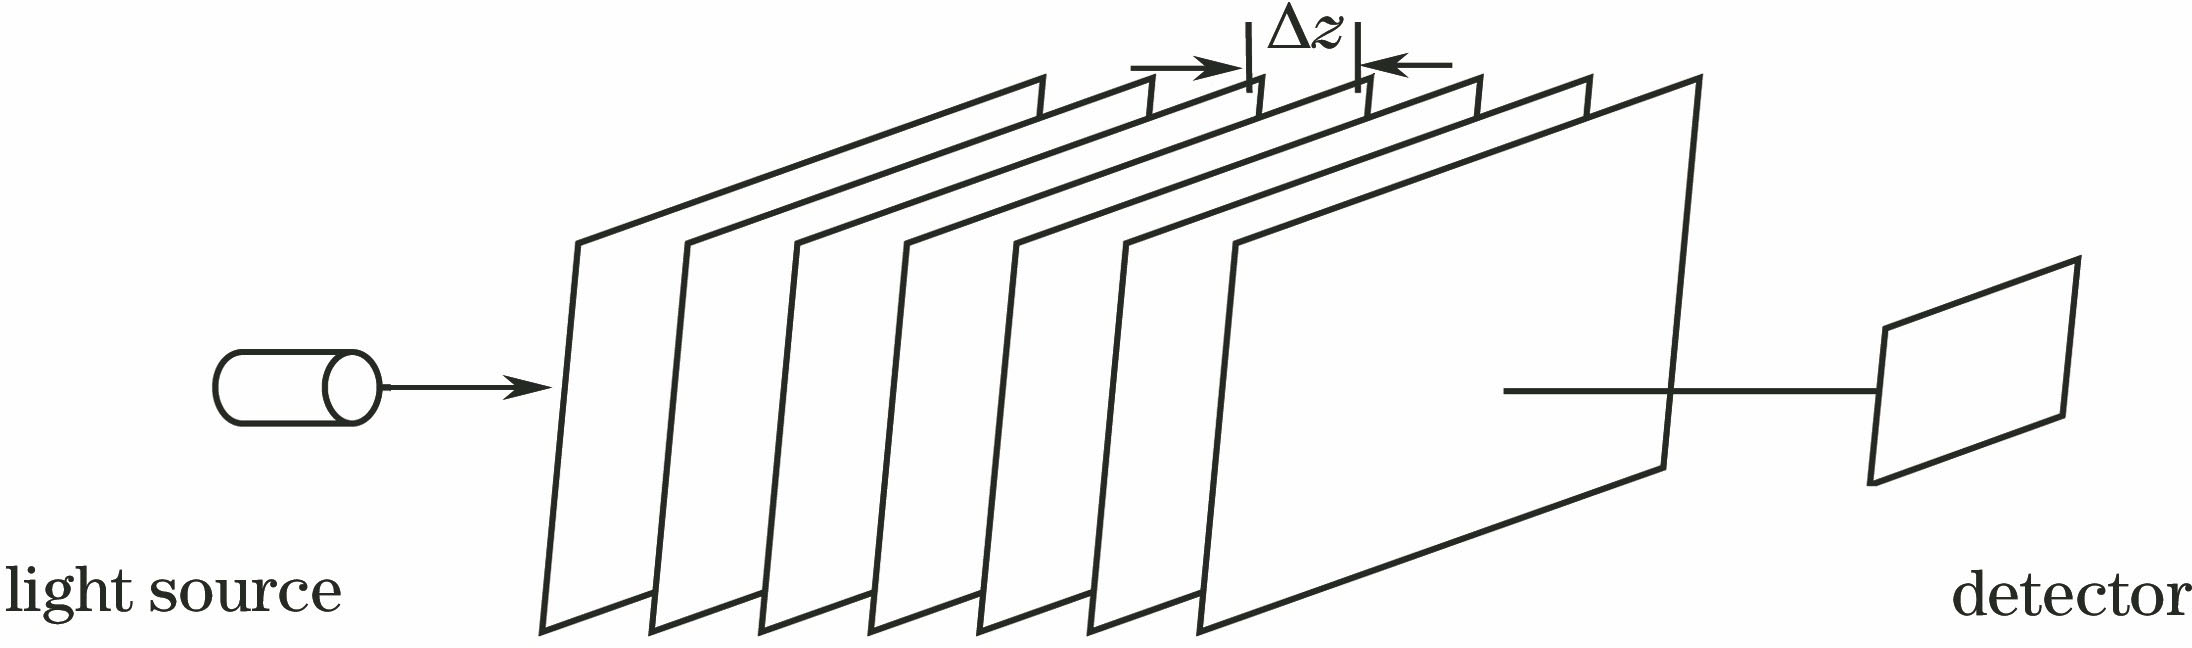 Schematic of beam propagtion by numerical simulation